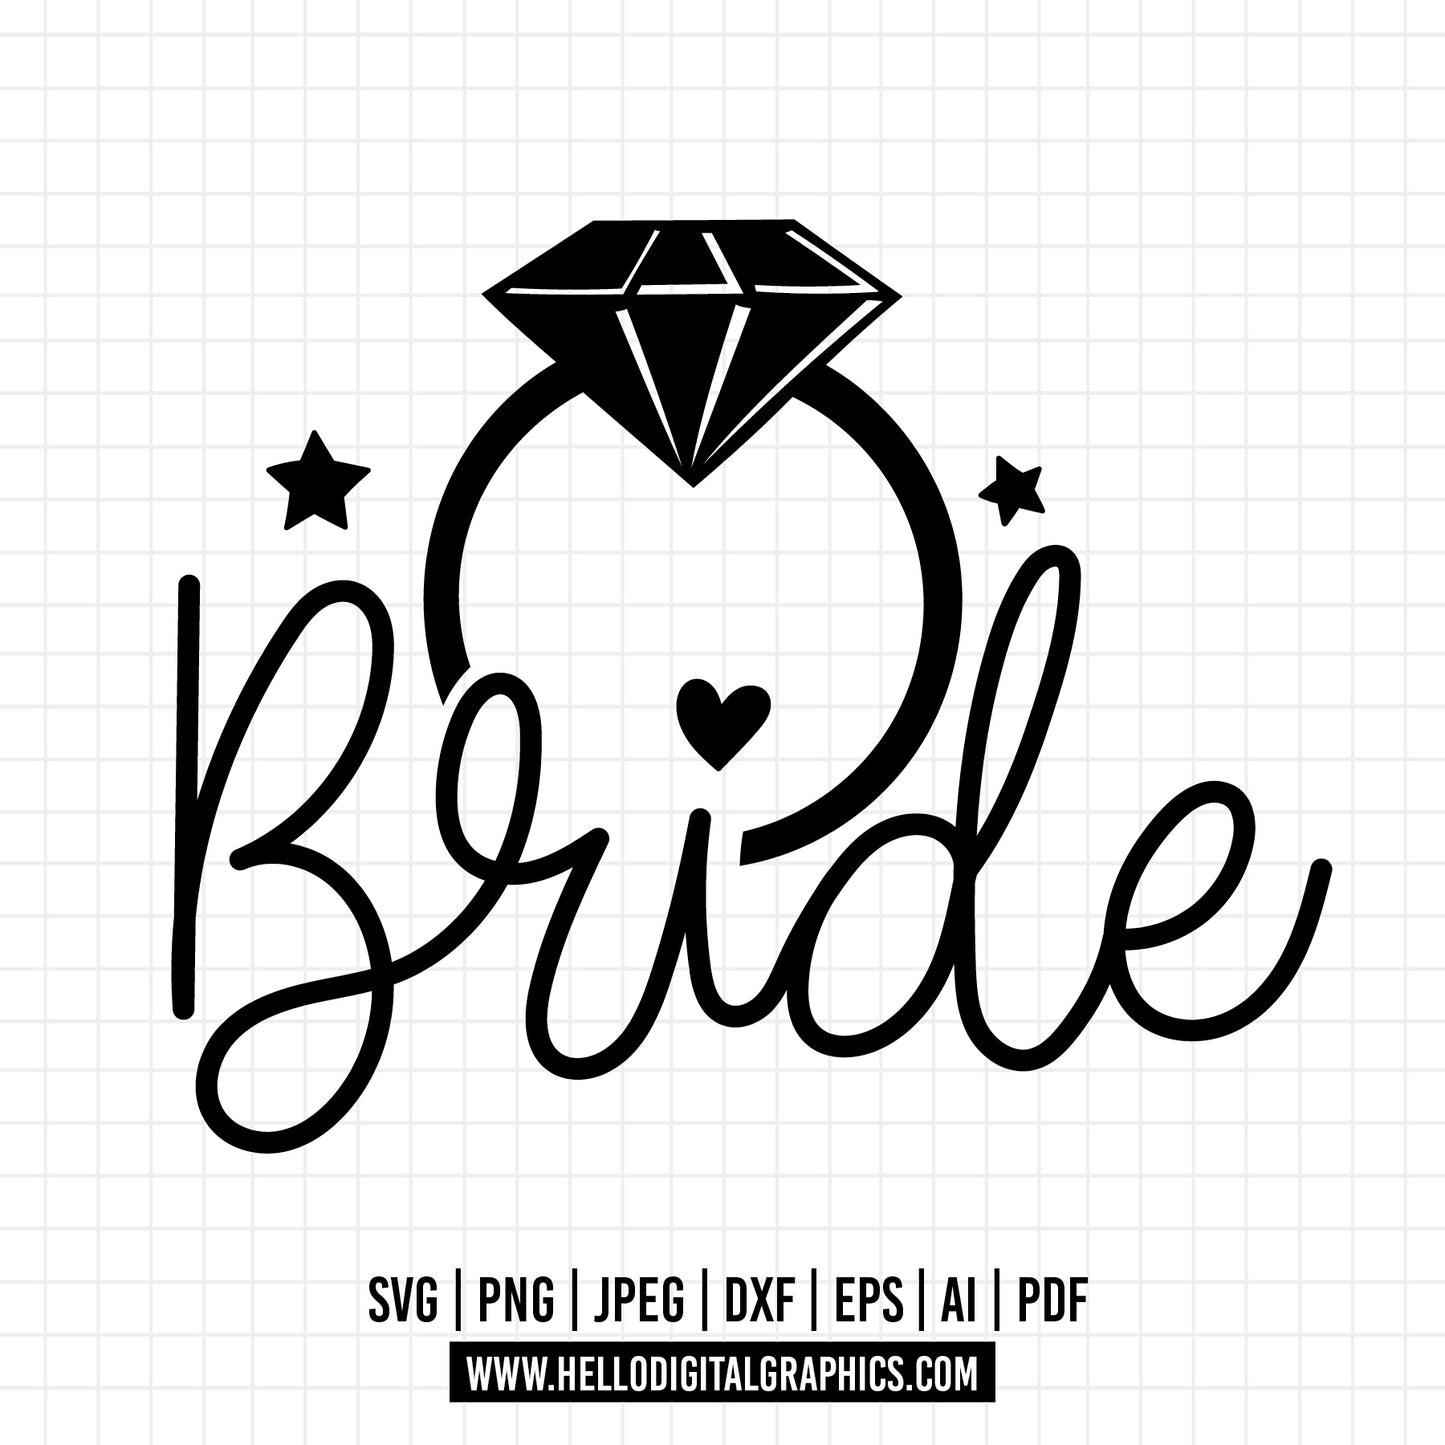 COD1182 Bride Instant Digital Download ,svg, png, jpg, and eps files included. Wedding, Diamond Ring, Bridal Party, Bachelorette